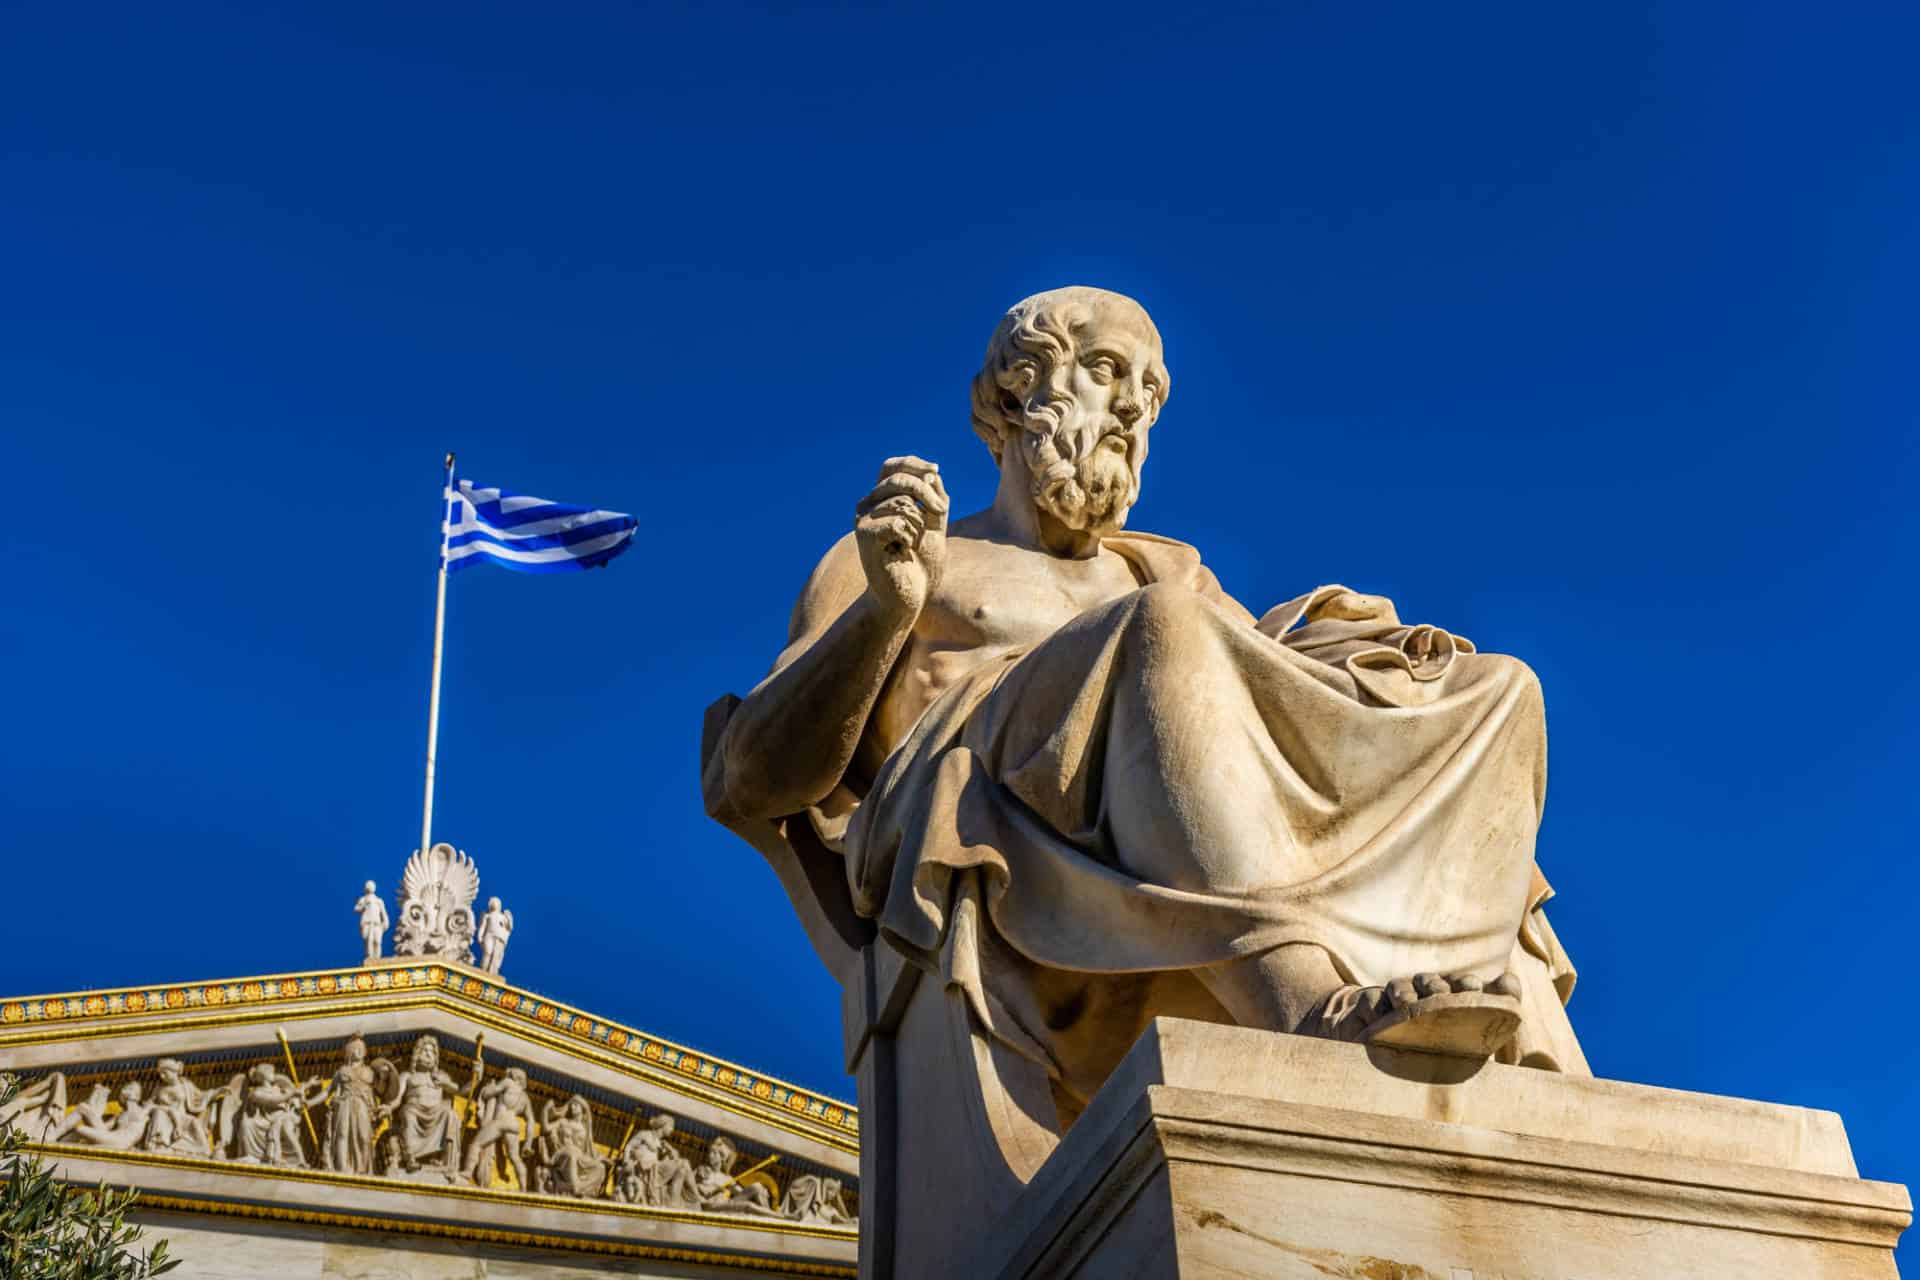 Close up view of a statue of the Greek philosopher Plato in front of the Academy of Athens in Greece